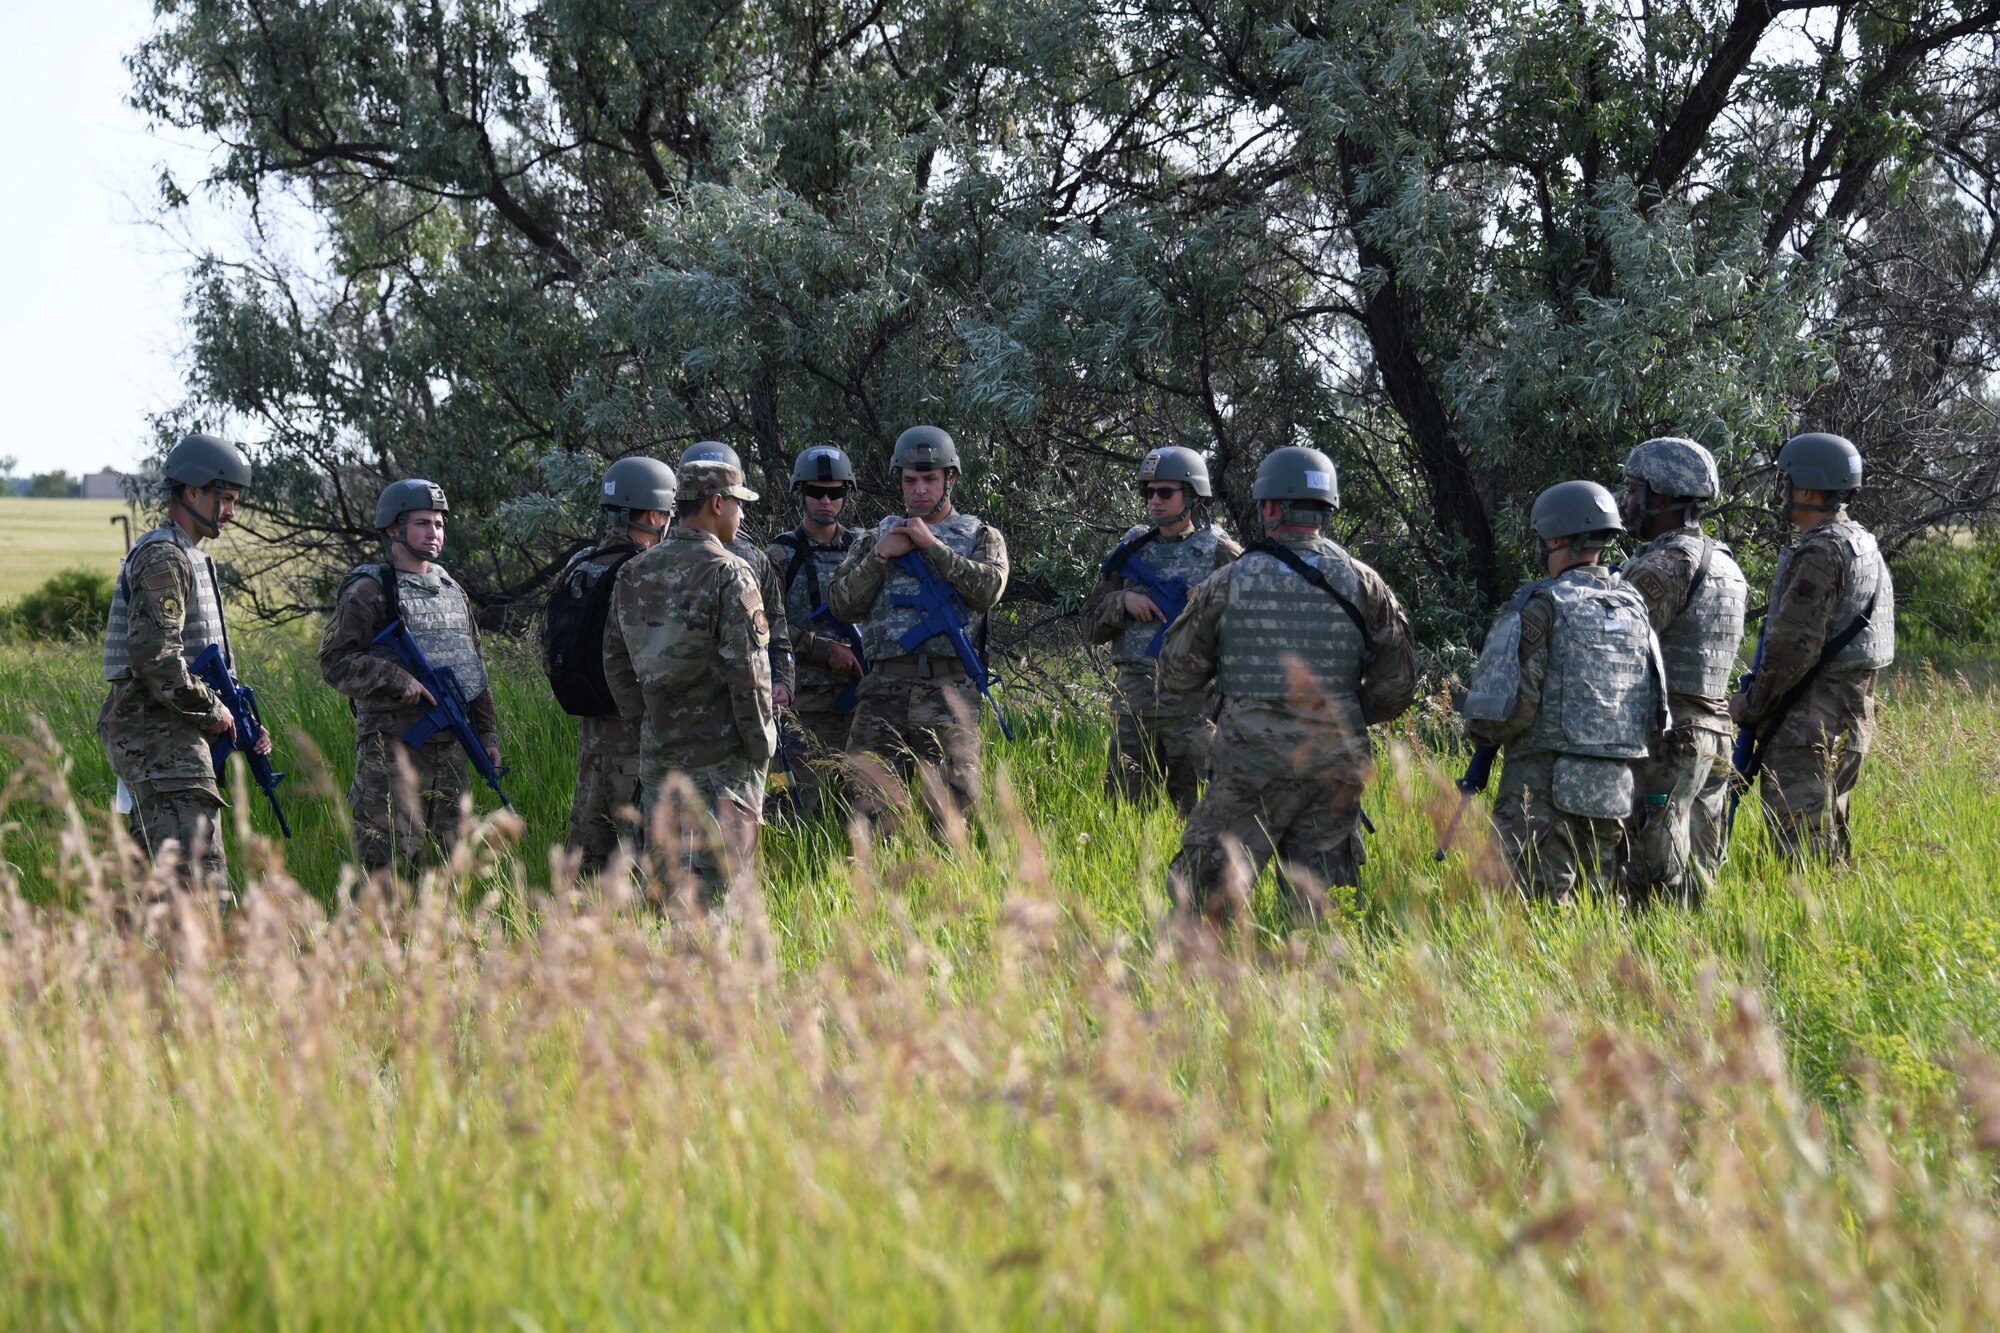 Airmen from the 319th Civil Engineer Squadron gather to discuss operations during a Prime Base Engineer Emergency Force training on Grand Forks Air Force Base, North Dakota, July 14, 2022. The Prime BEEF training allowed Airmen to exercise and conduct operations down range, which included hands-on training such as land navigation, troop movement, and tactical combat casualty care. (U.S. Air Force photo by Senior Airman Ashley Richards)